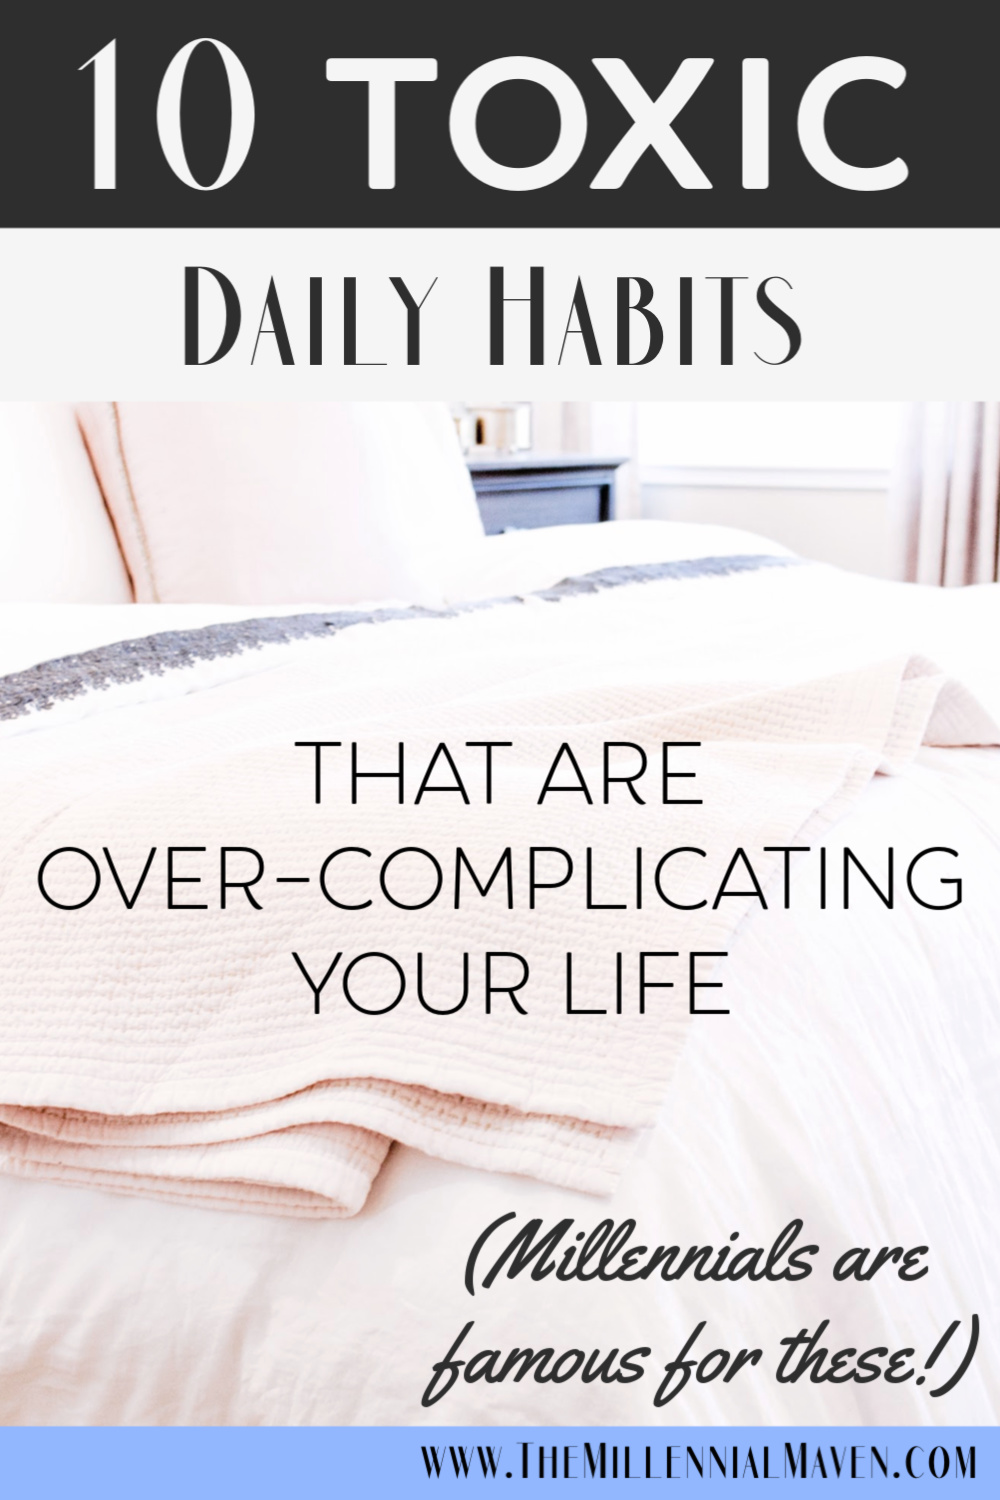 10 Toxic Habits That Are Over-Complicating Your Life || How To Live Your Best Life || The Millennial Maven #toxichabits #selfcare #healthyhabits #healthylifestyle #productivity